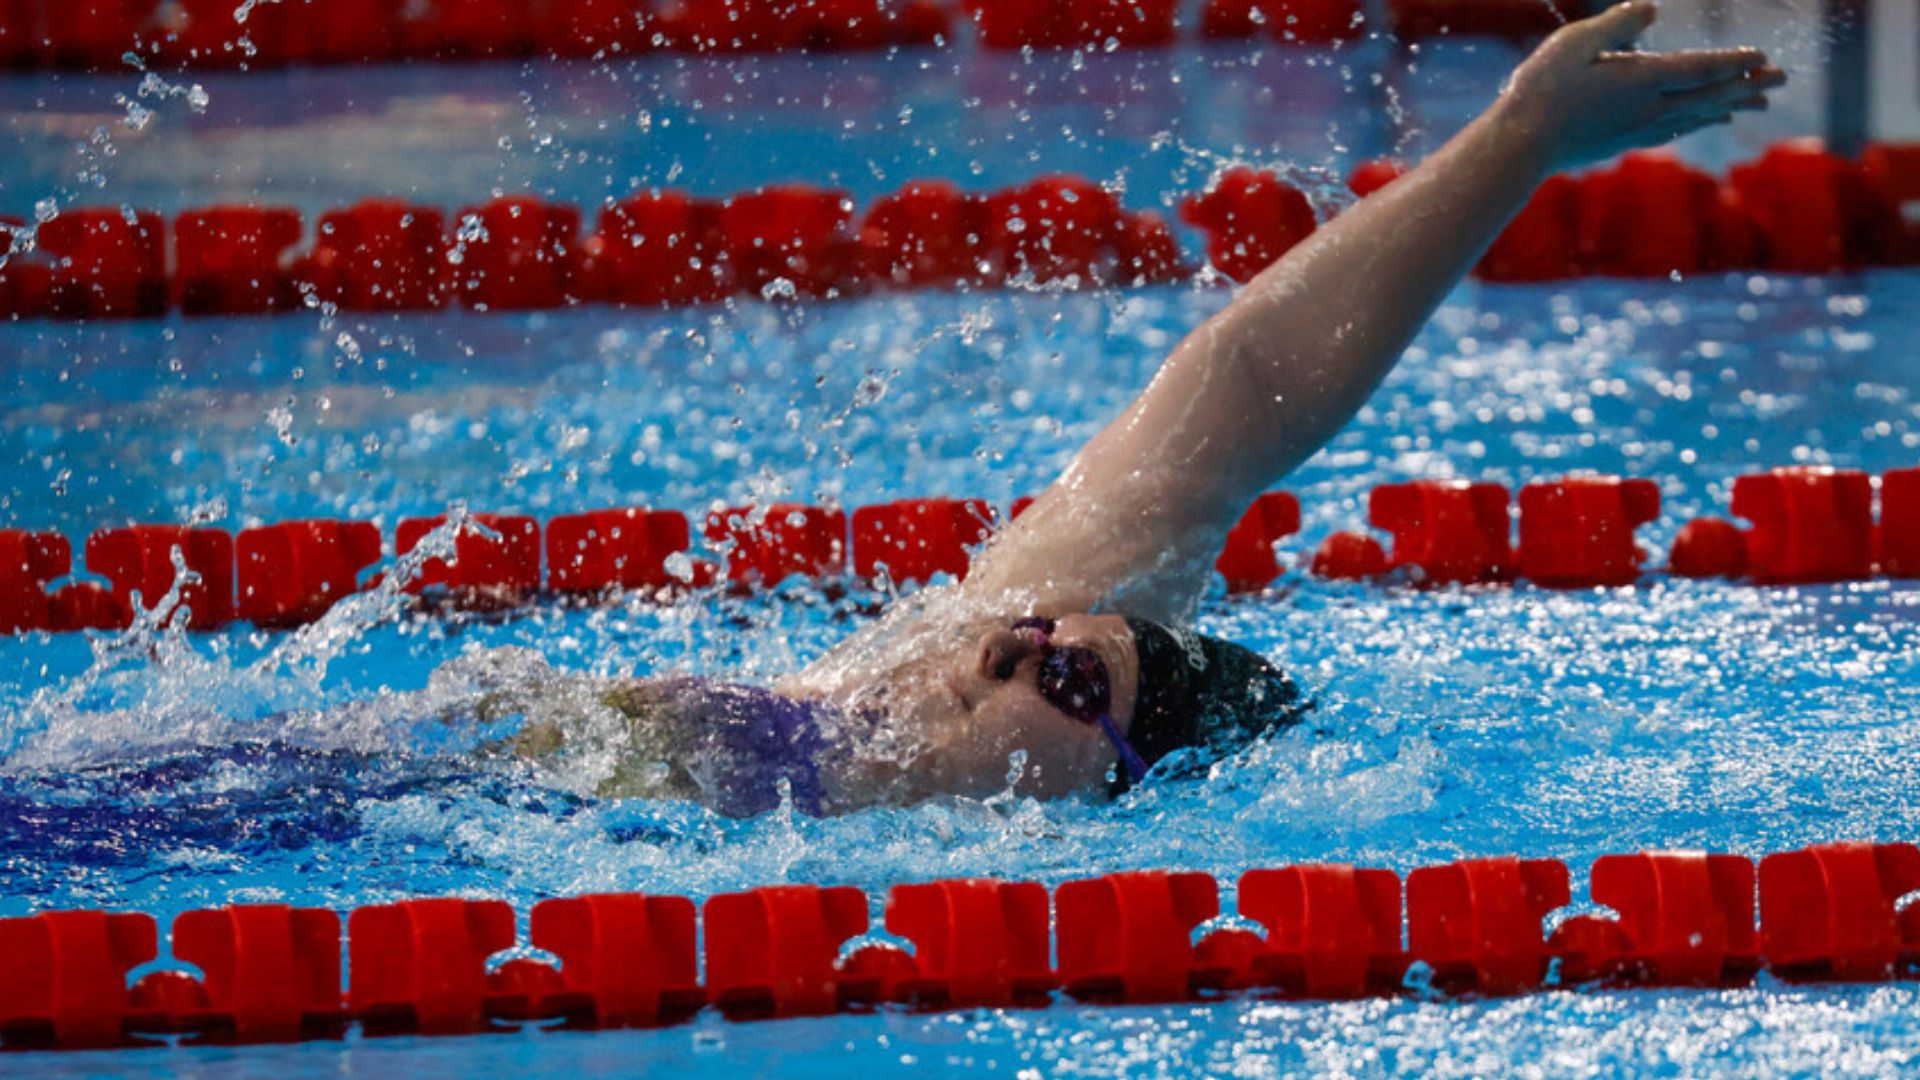 Ruby Stevens Shines with a Pan American Record in 100 meters Backstroke S6